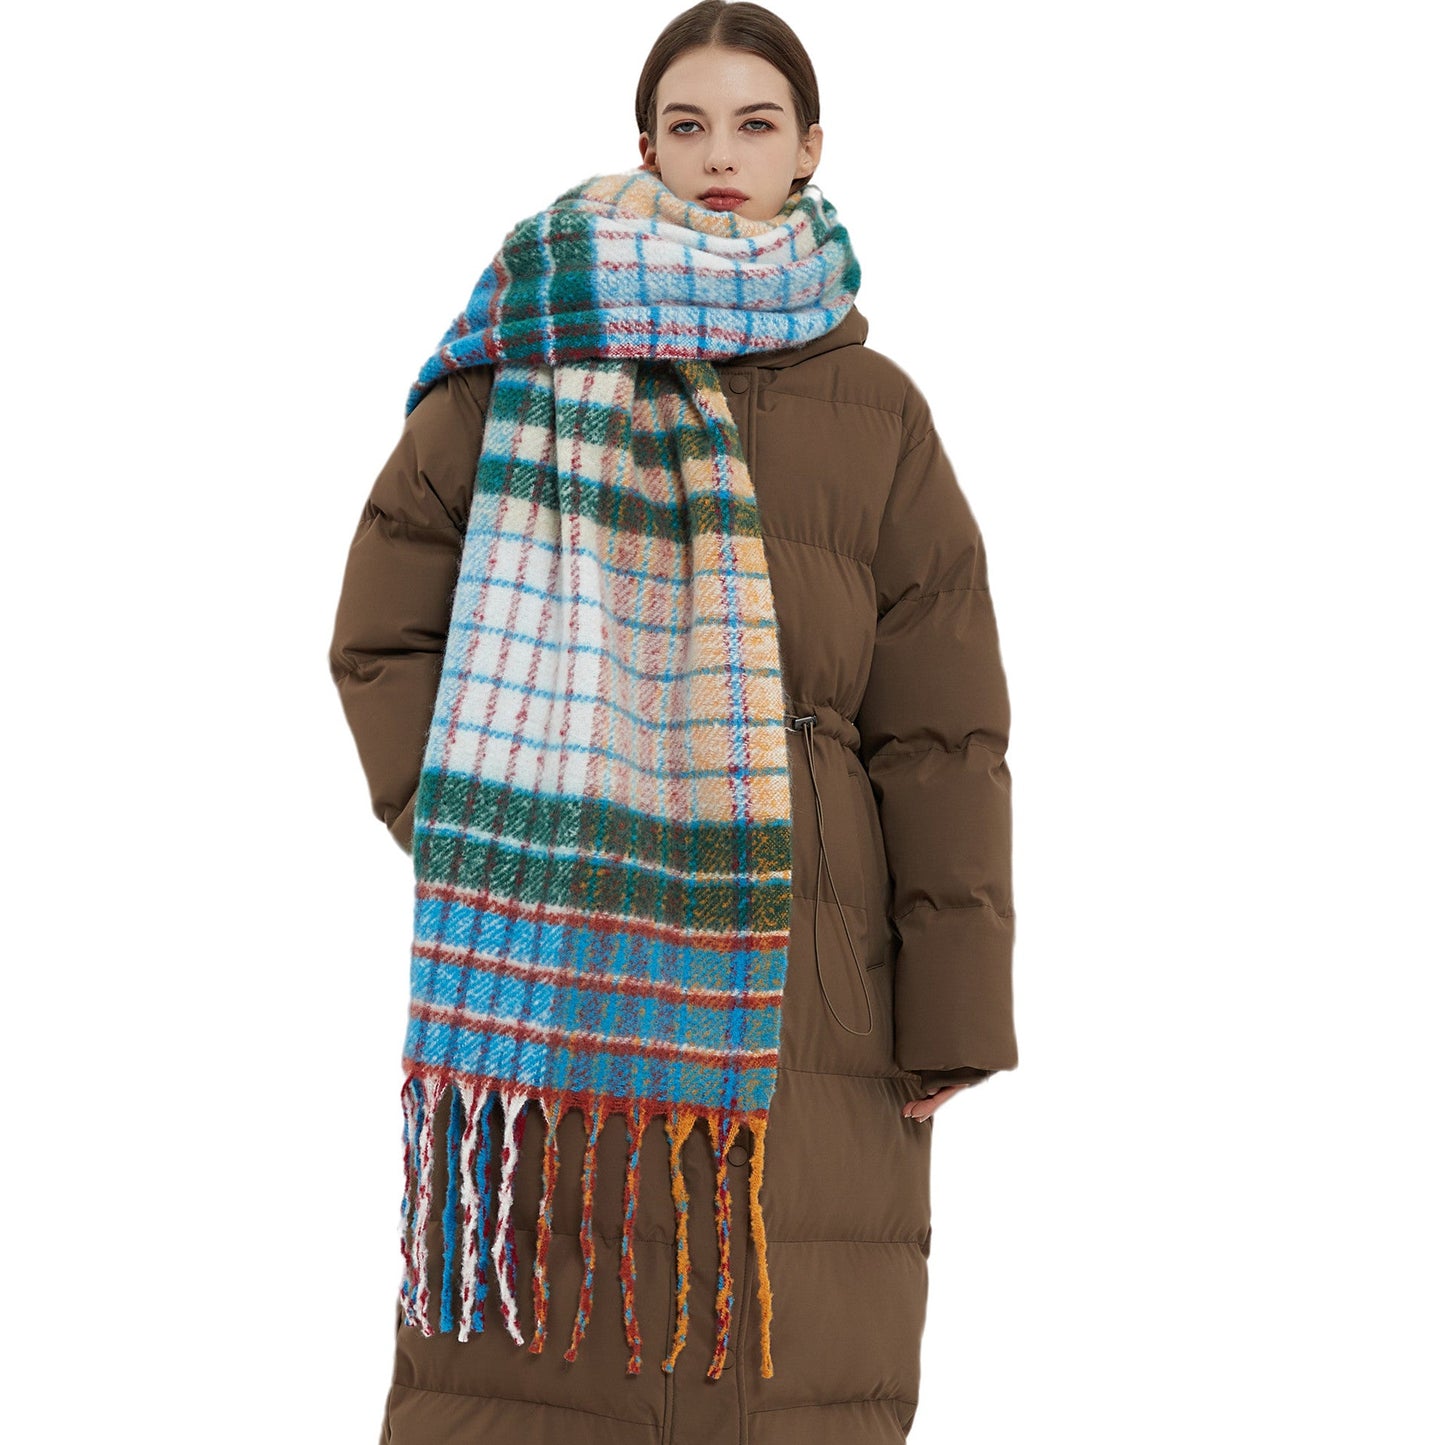 Casual Rainbow Print Winter Warm Shawl Scarves-Scarves & Shawls-The same as picture-Free Shipping Leatheretro